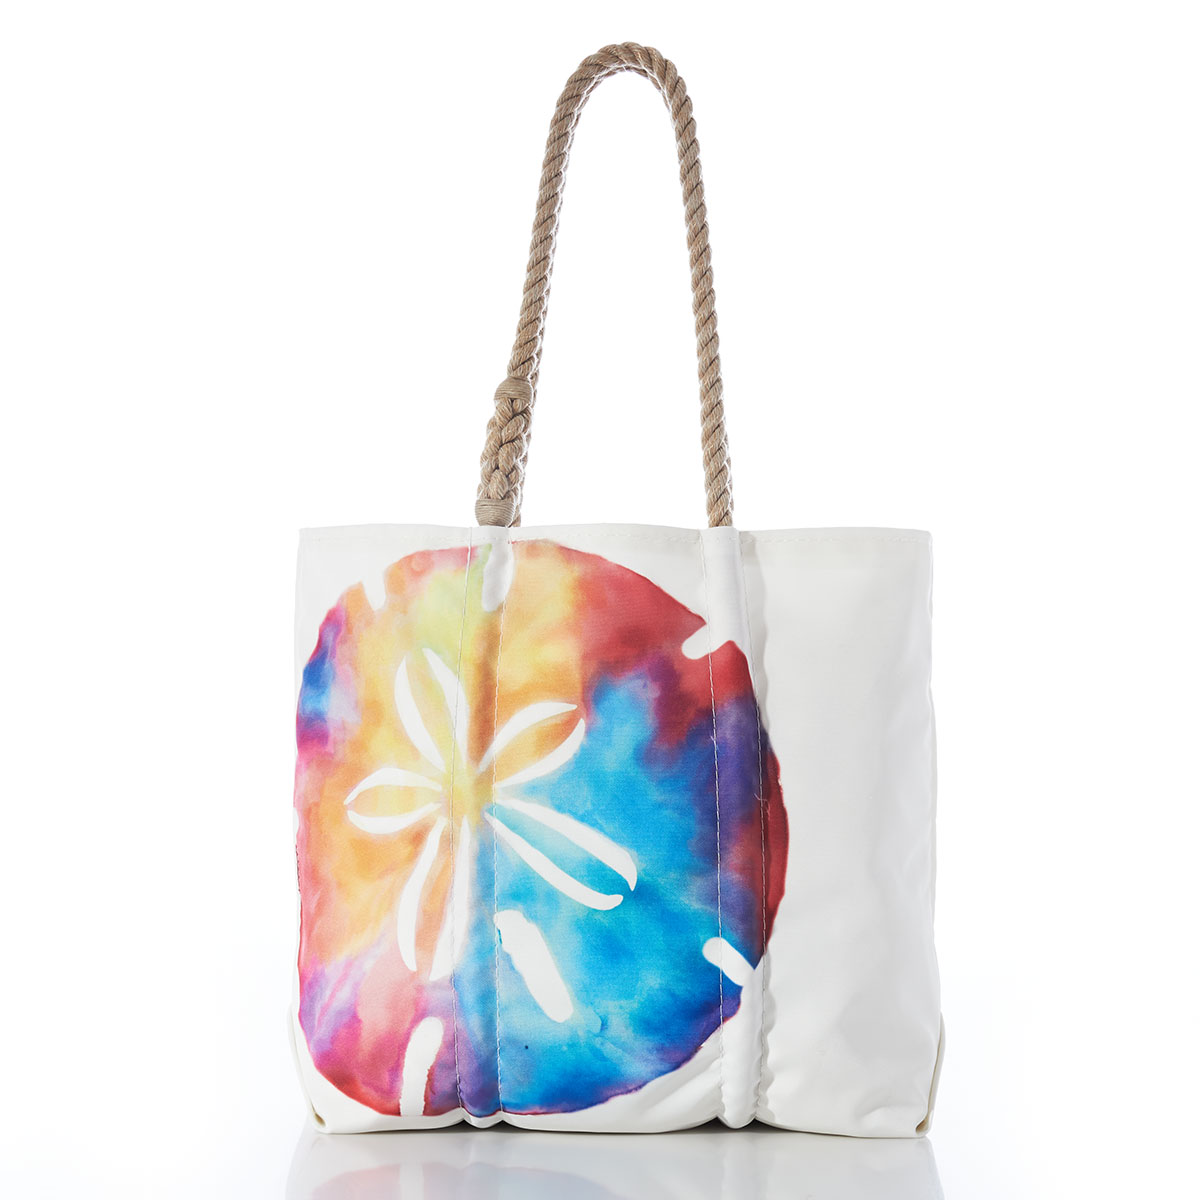 front view of a white recycled sail cloth medium tote with hemp rope handles and a printed sand dollar in tie dye colors of pinks blues and yellows